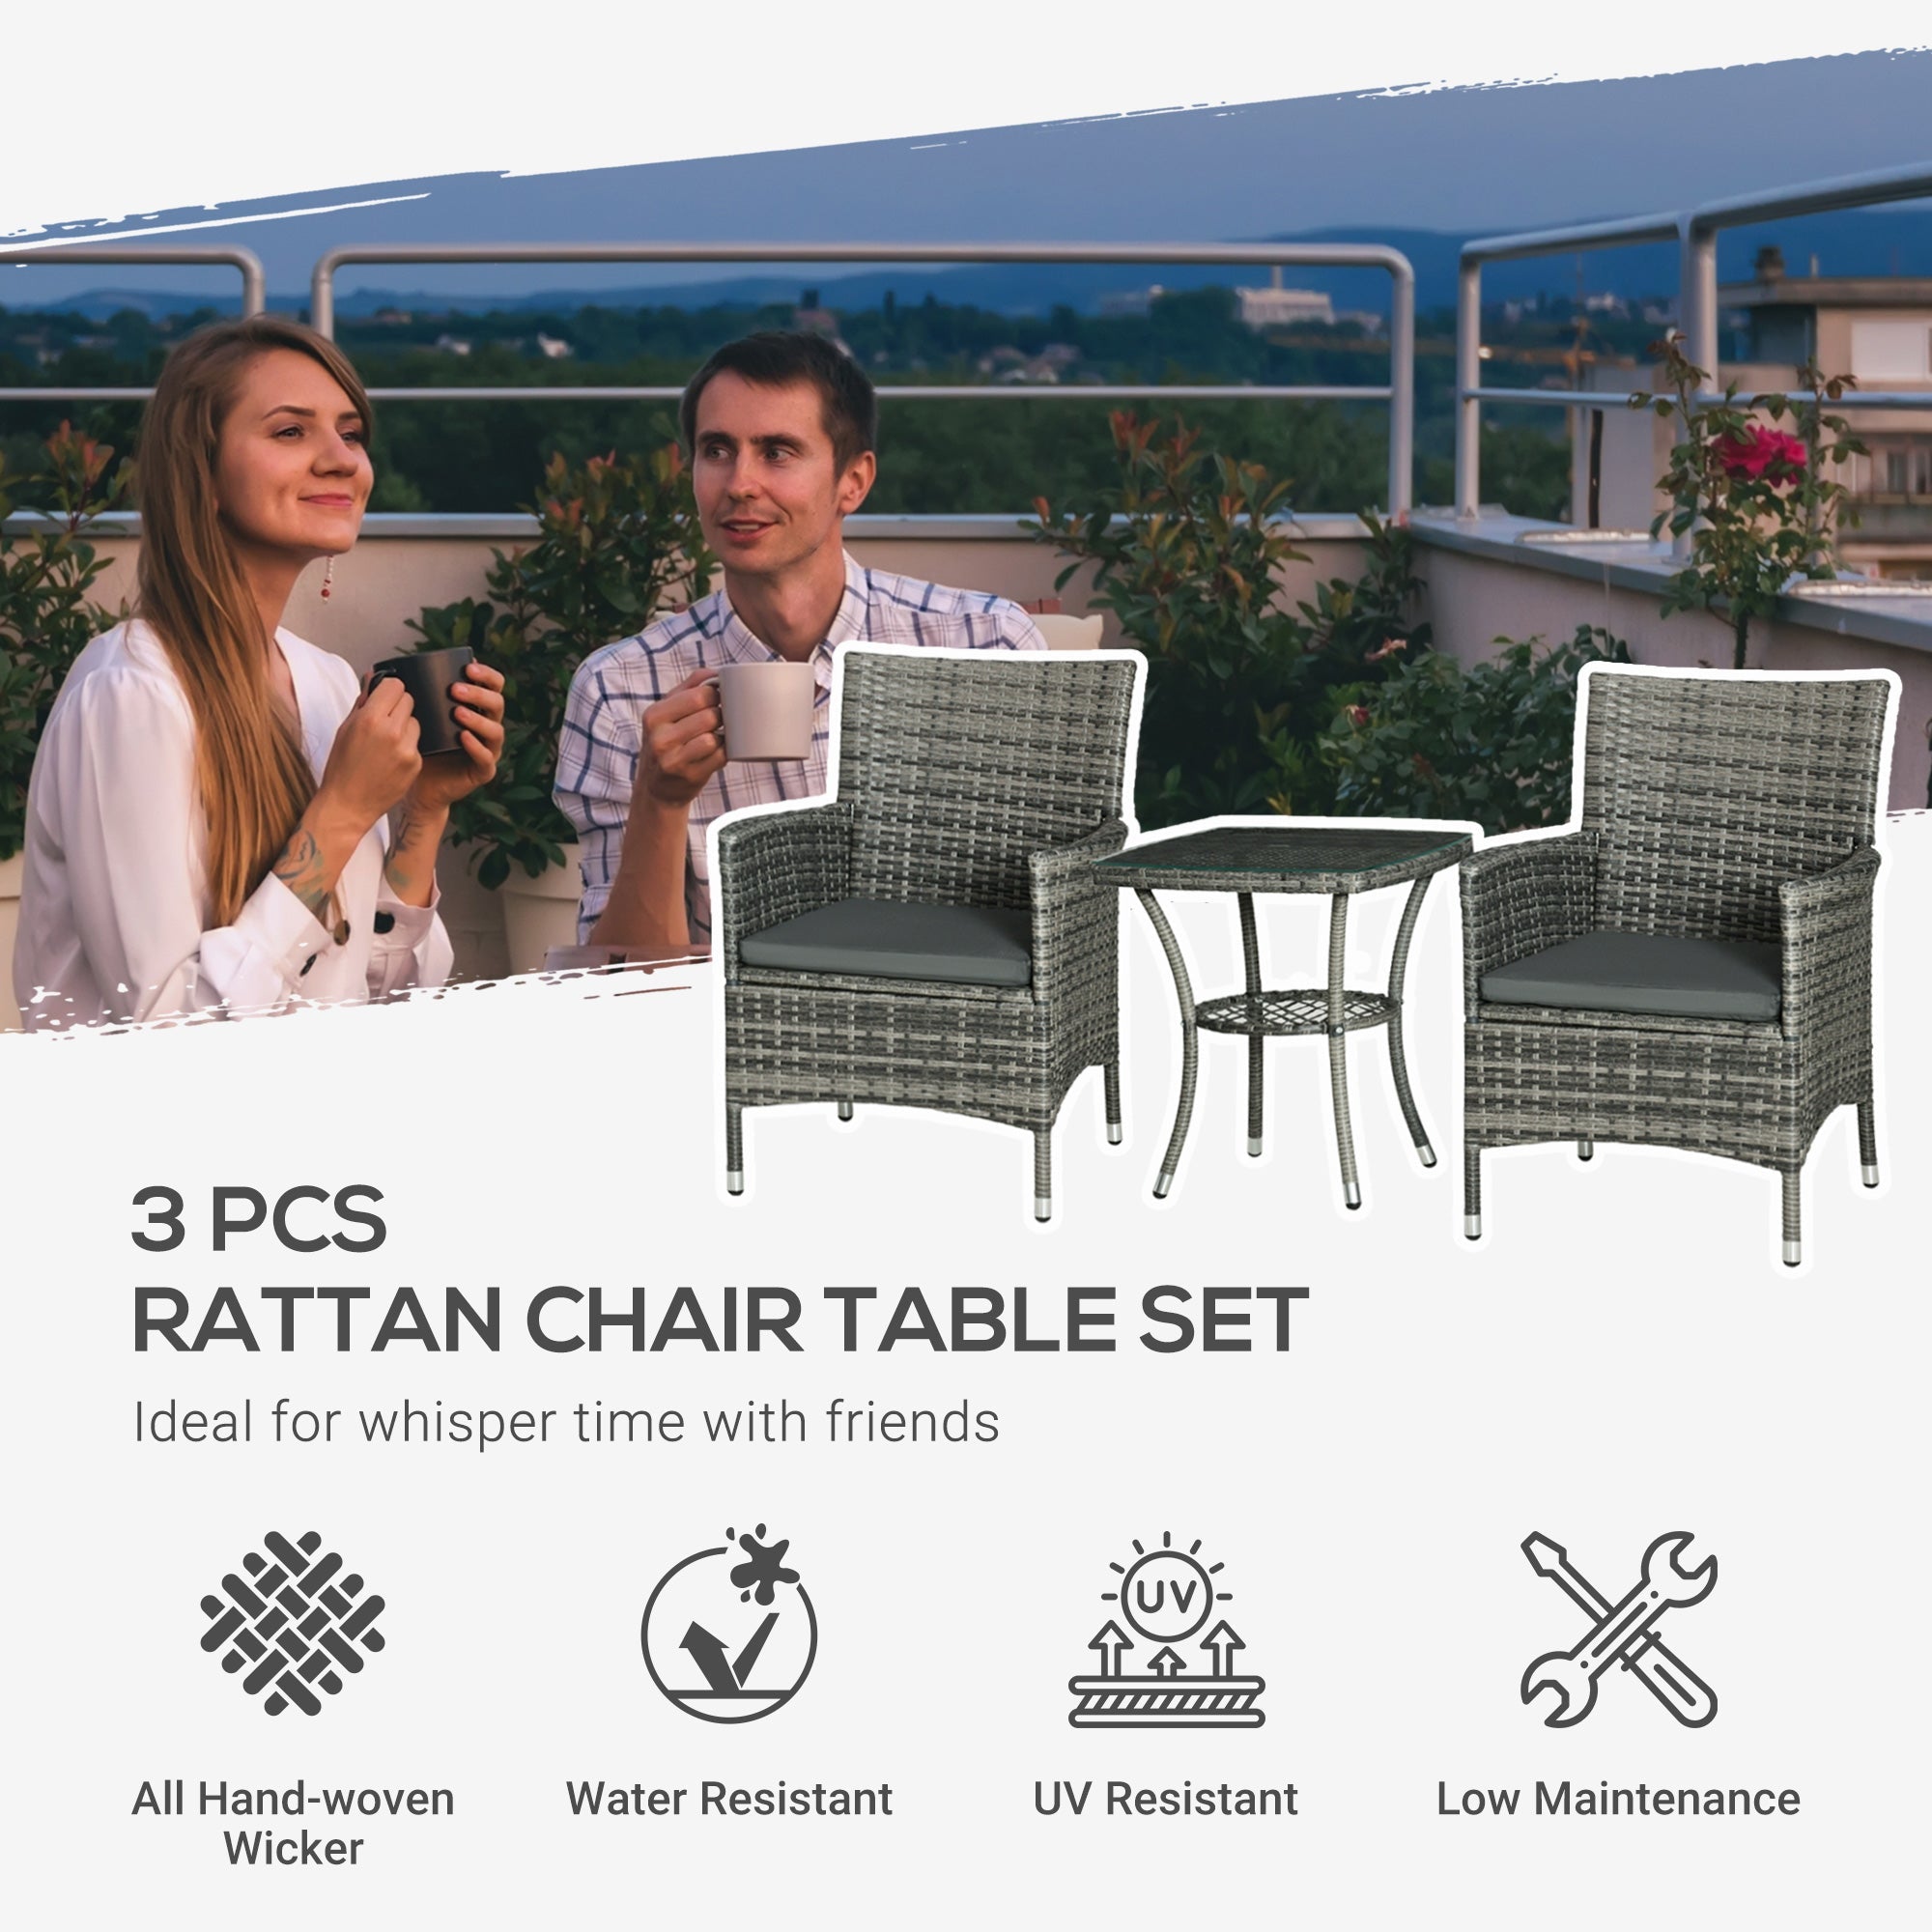 3 PCs Rattan Garden Bistro Set with Cushions Patio Weave Companion Chair Table Set Conservatory, Light Grey-3